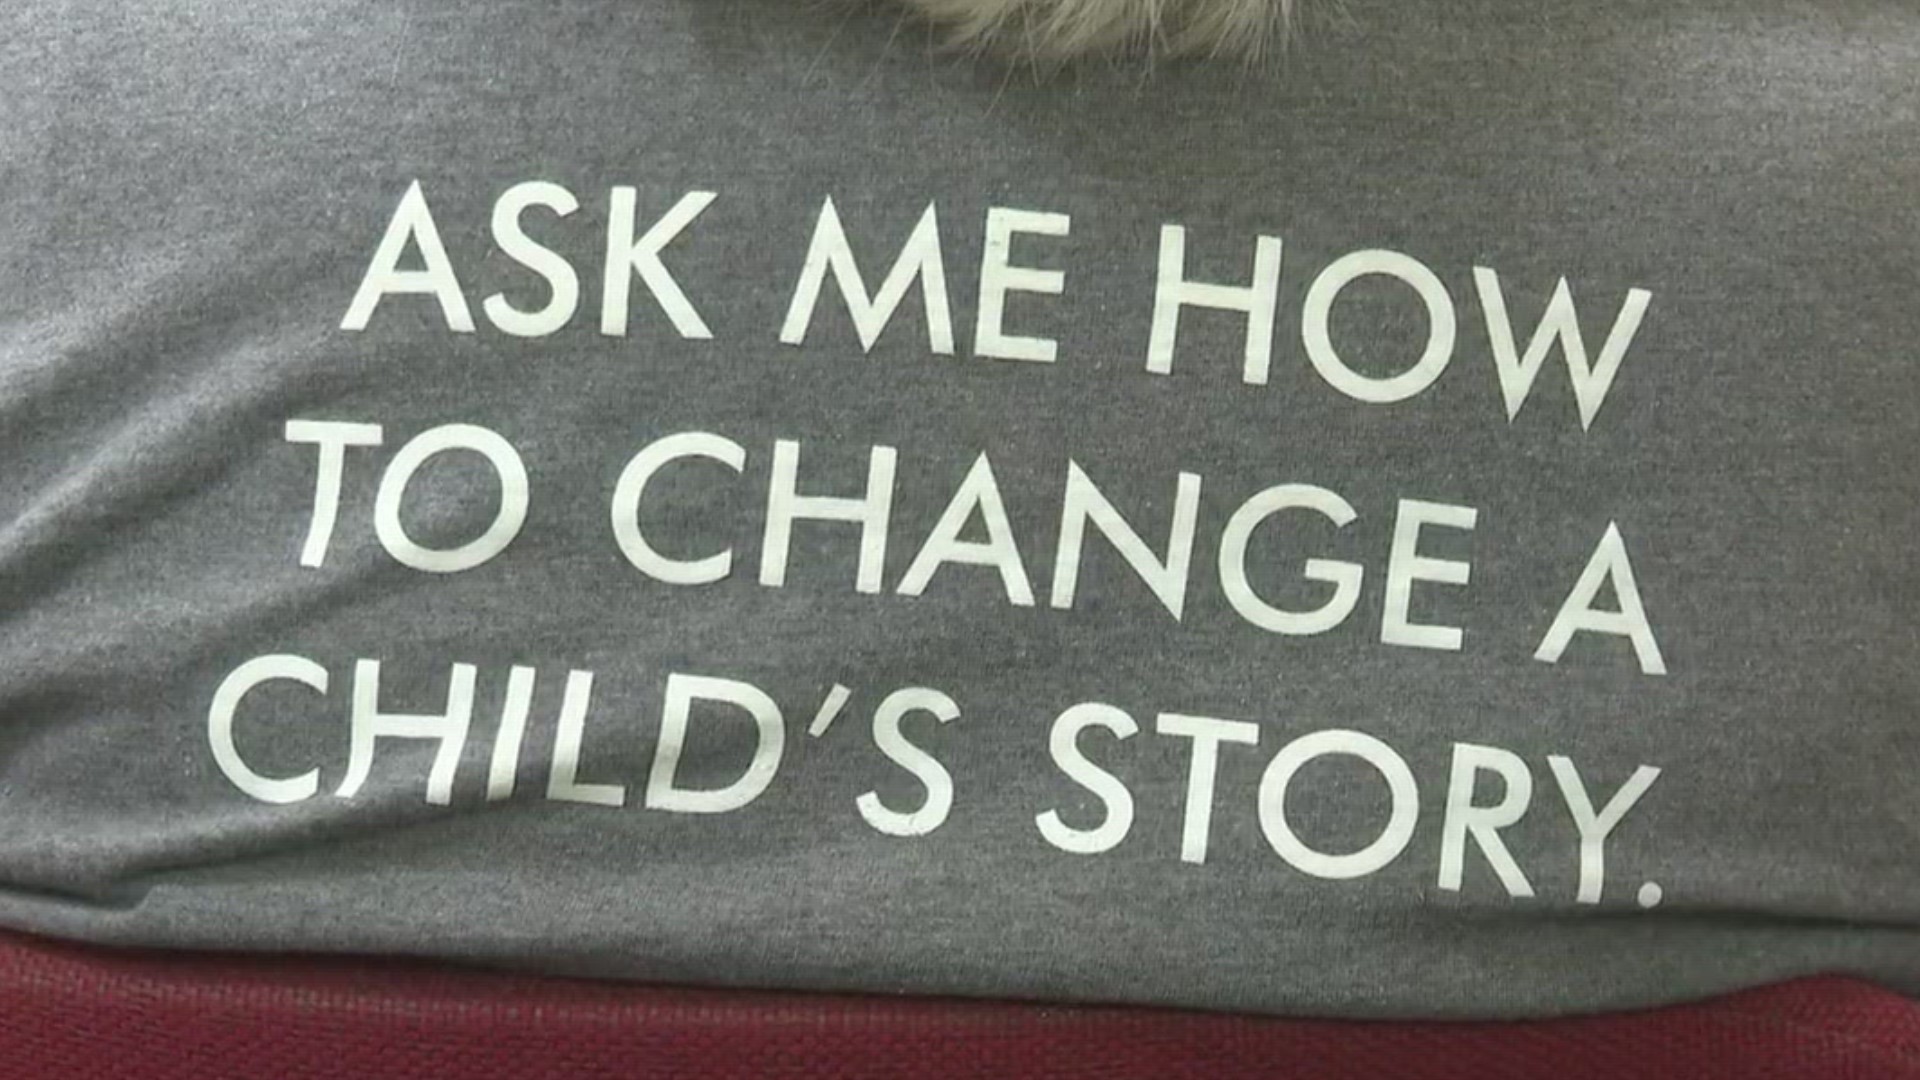 The ceremony included resources and tips to stand up for children who could be in abusive situations.